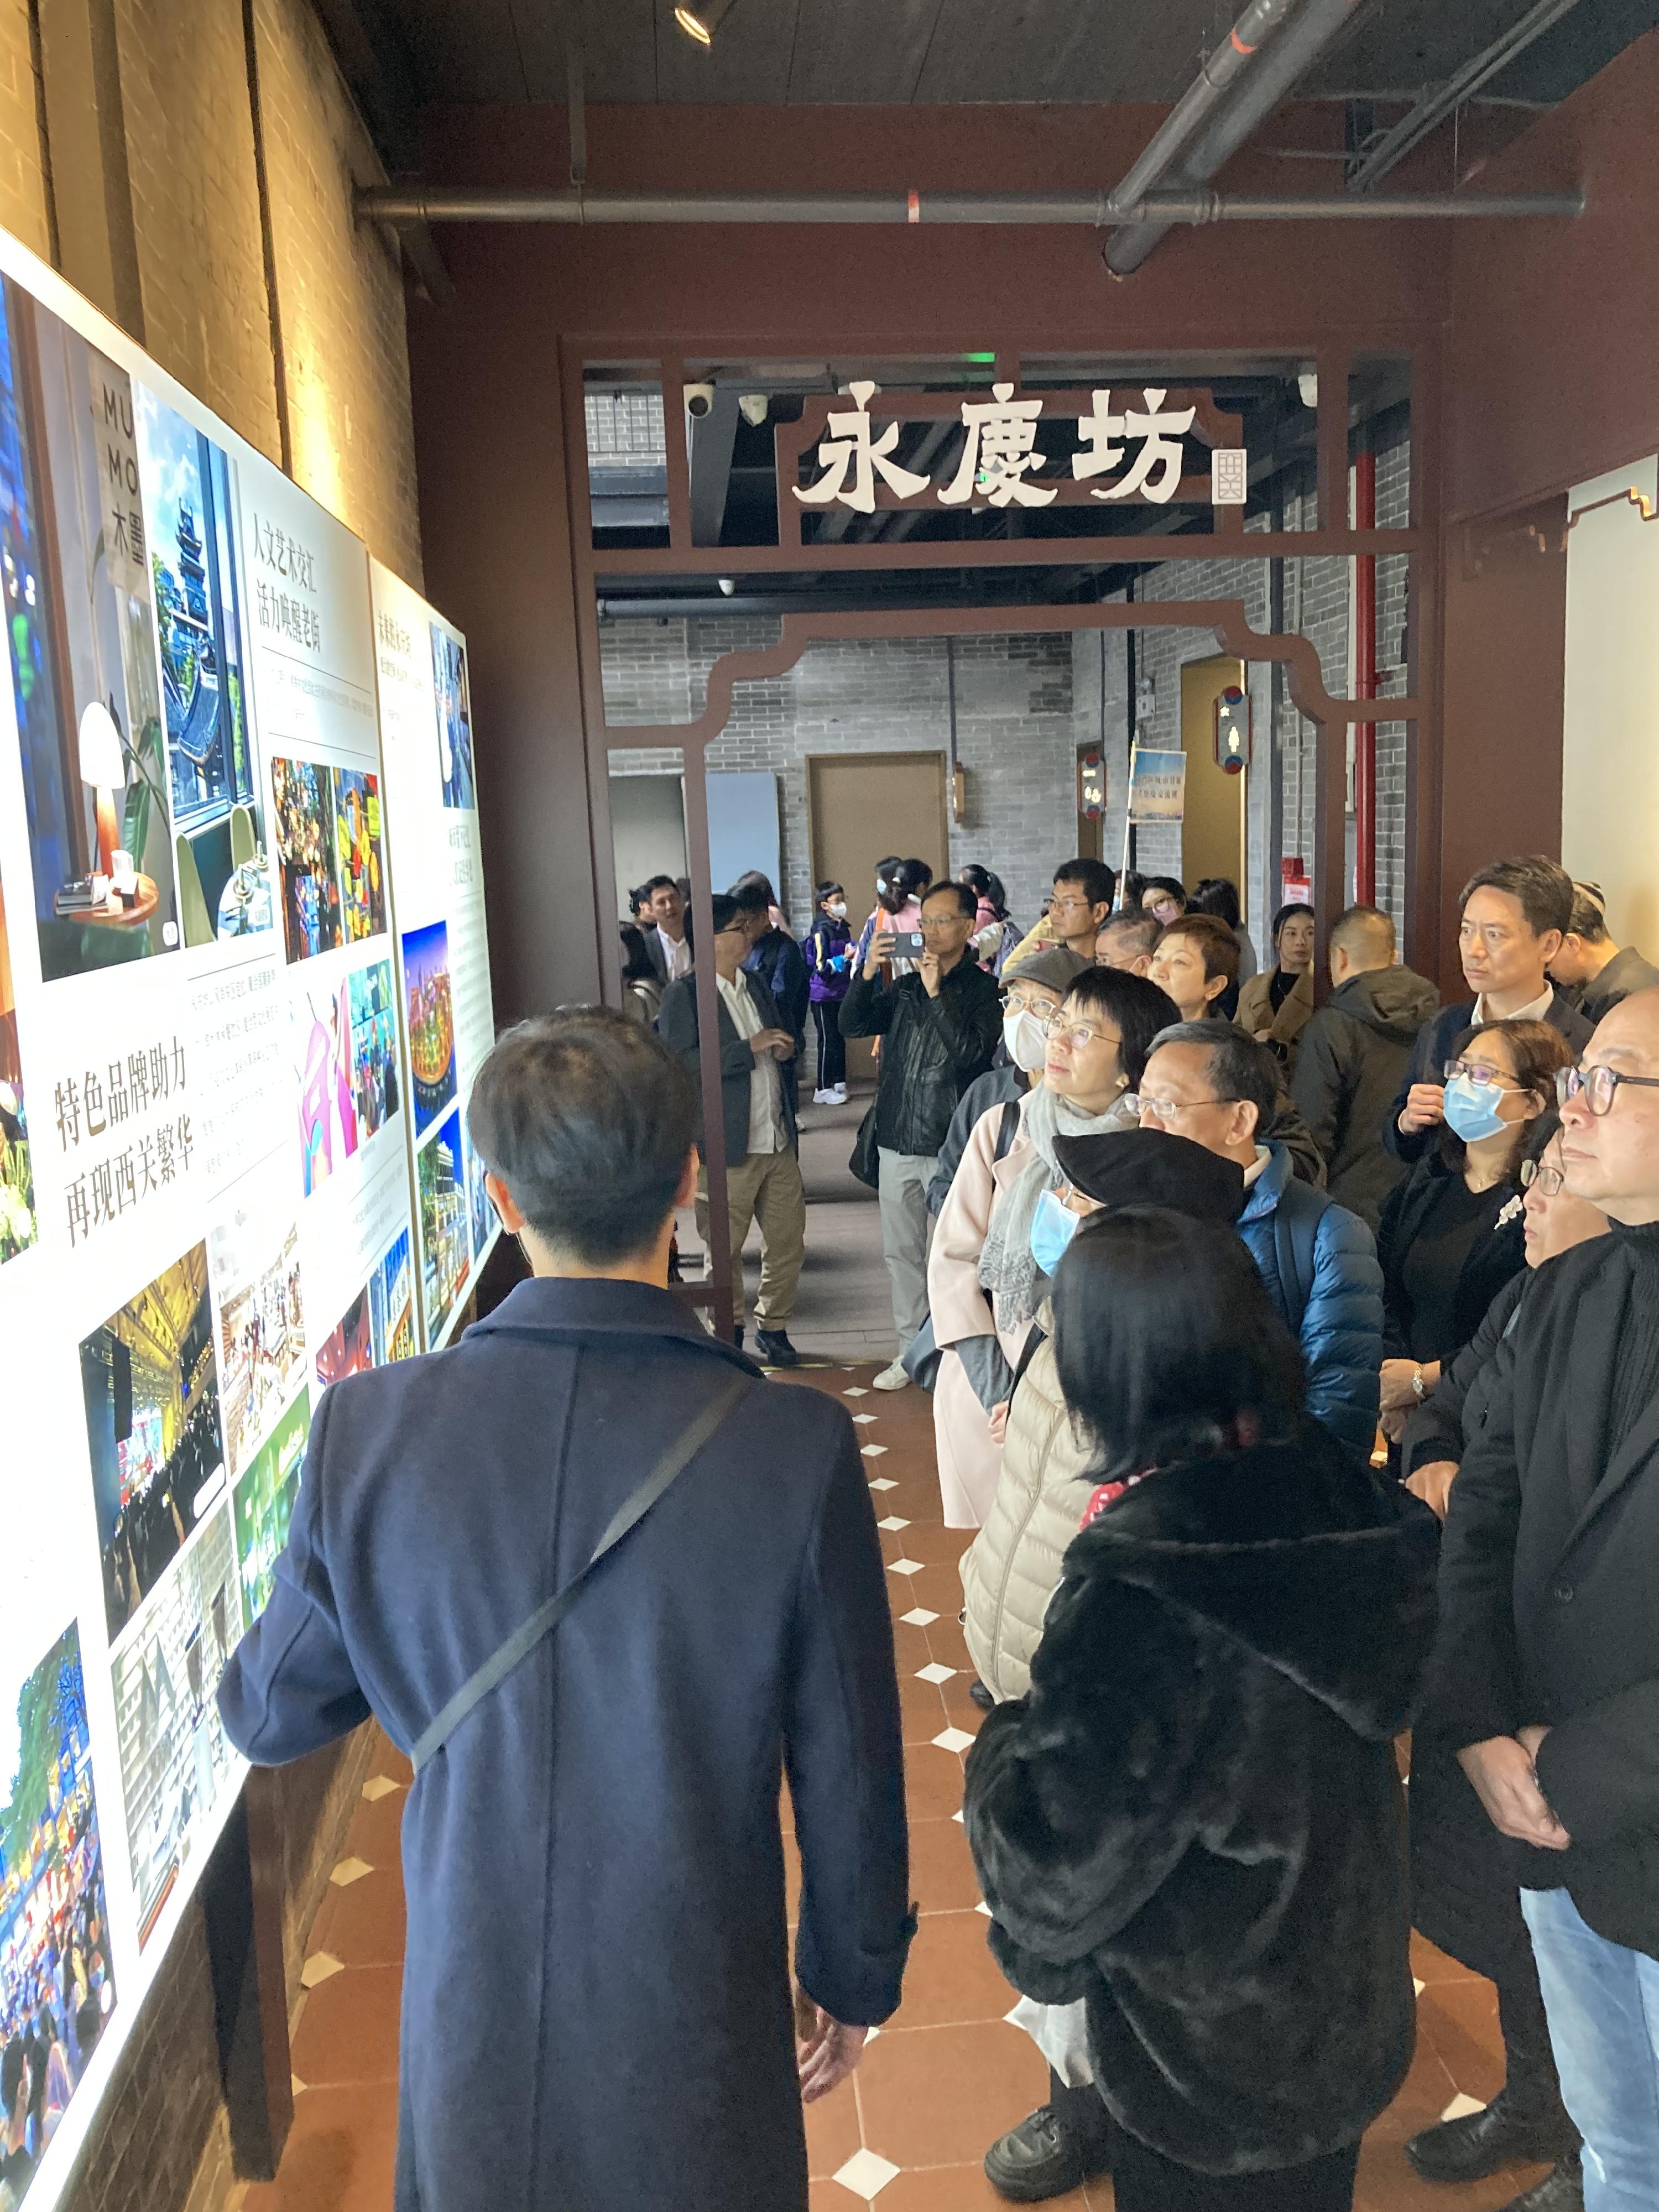 The Town Planning Board visited Guangzhou, Dongguan and Shenzhen from December 16 to 18 to better understand the prevailing urban planning and development in the Greater Bay Area. Photo shows the delegation visiting Yongqingfang and listening to an introduction of the old city revitalisation planning model.